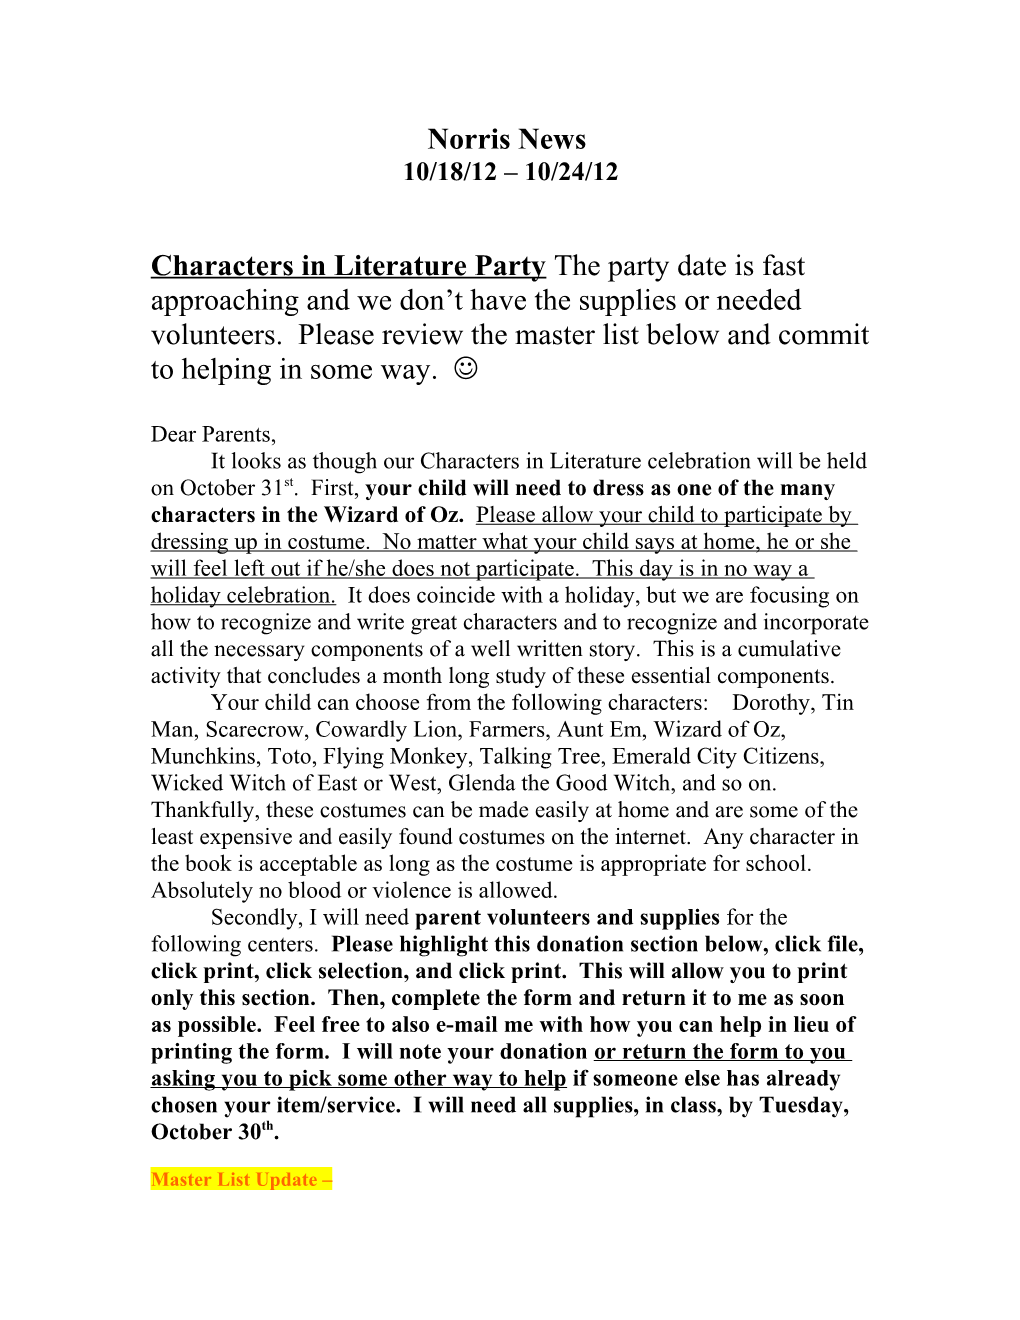 Characters in Literature Party the Party Date Is Fast Approaching and We Don T Have The